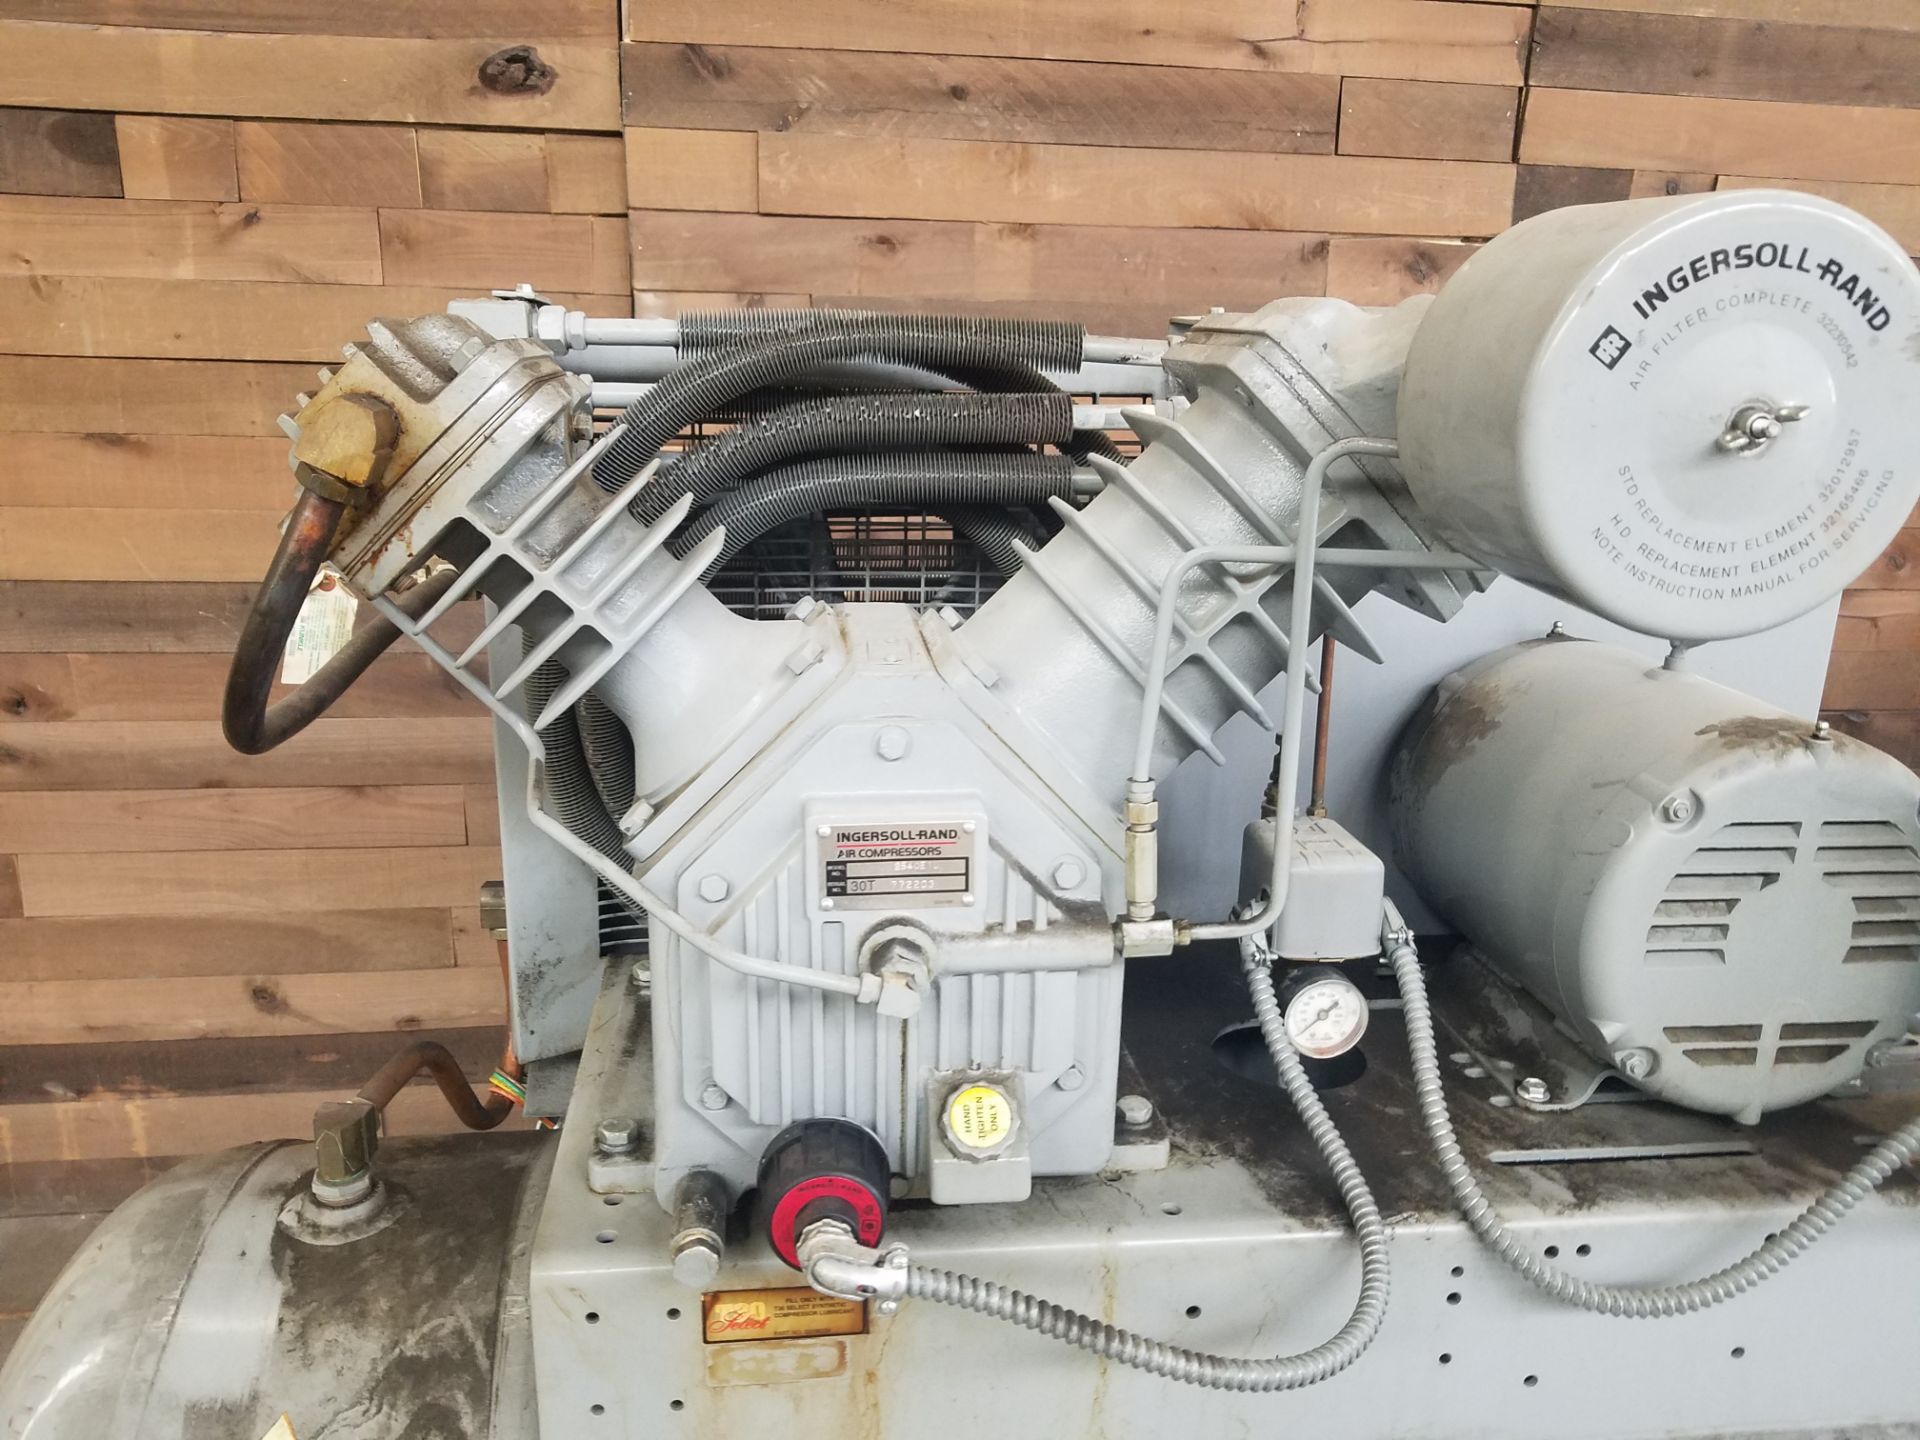 Ingersoll Rand 10 hp Air Compressor, Model T30 with 120 Gal. Tank, 230/460 V, 3 Phase - Image 2 of 5